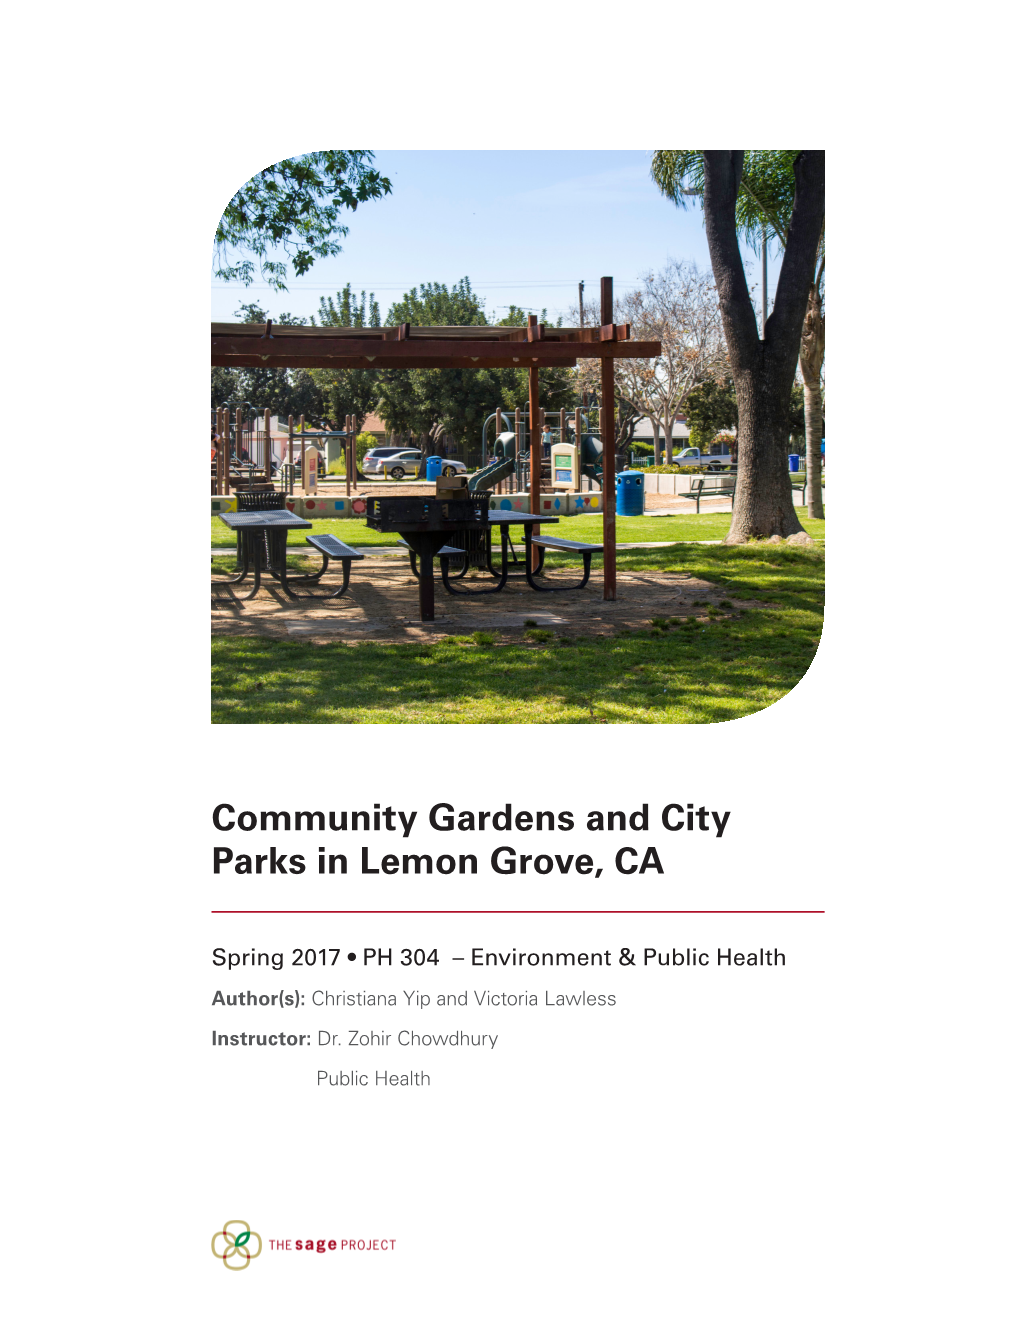 Community Gardens and City Parks in Lemon Grove, CA